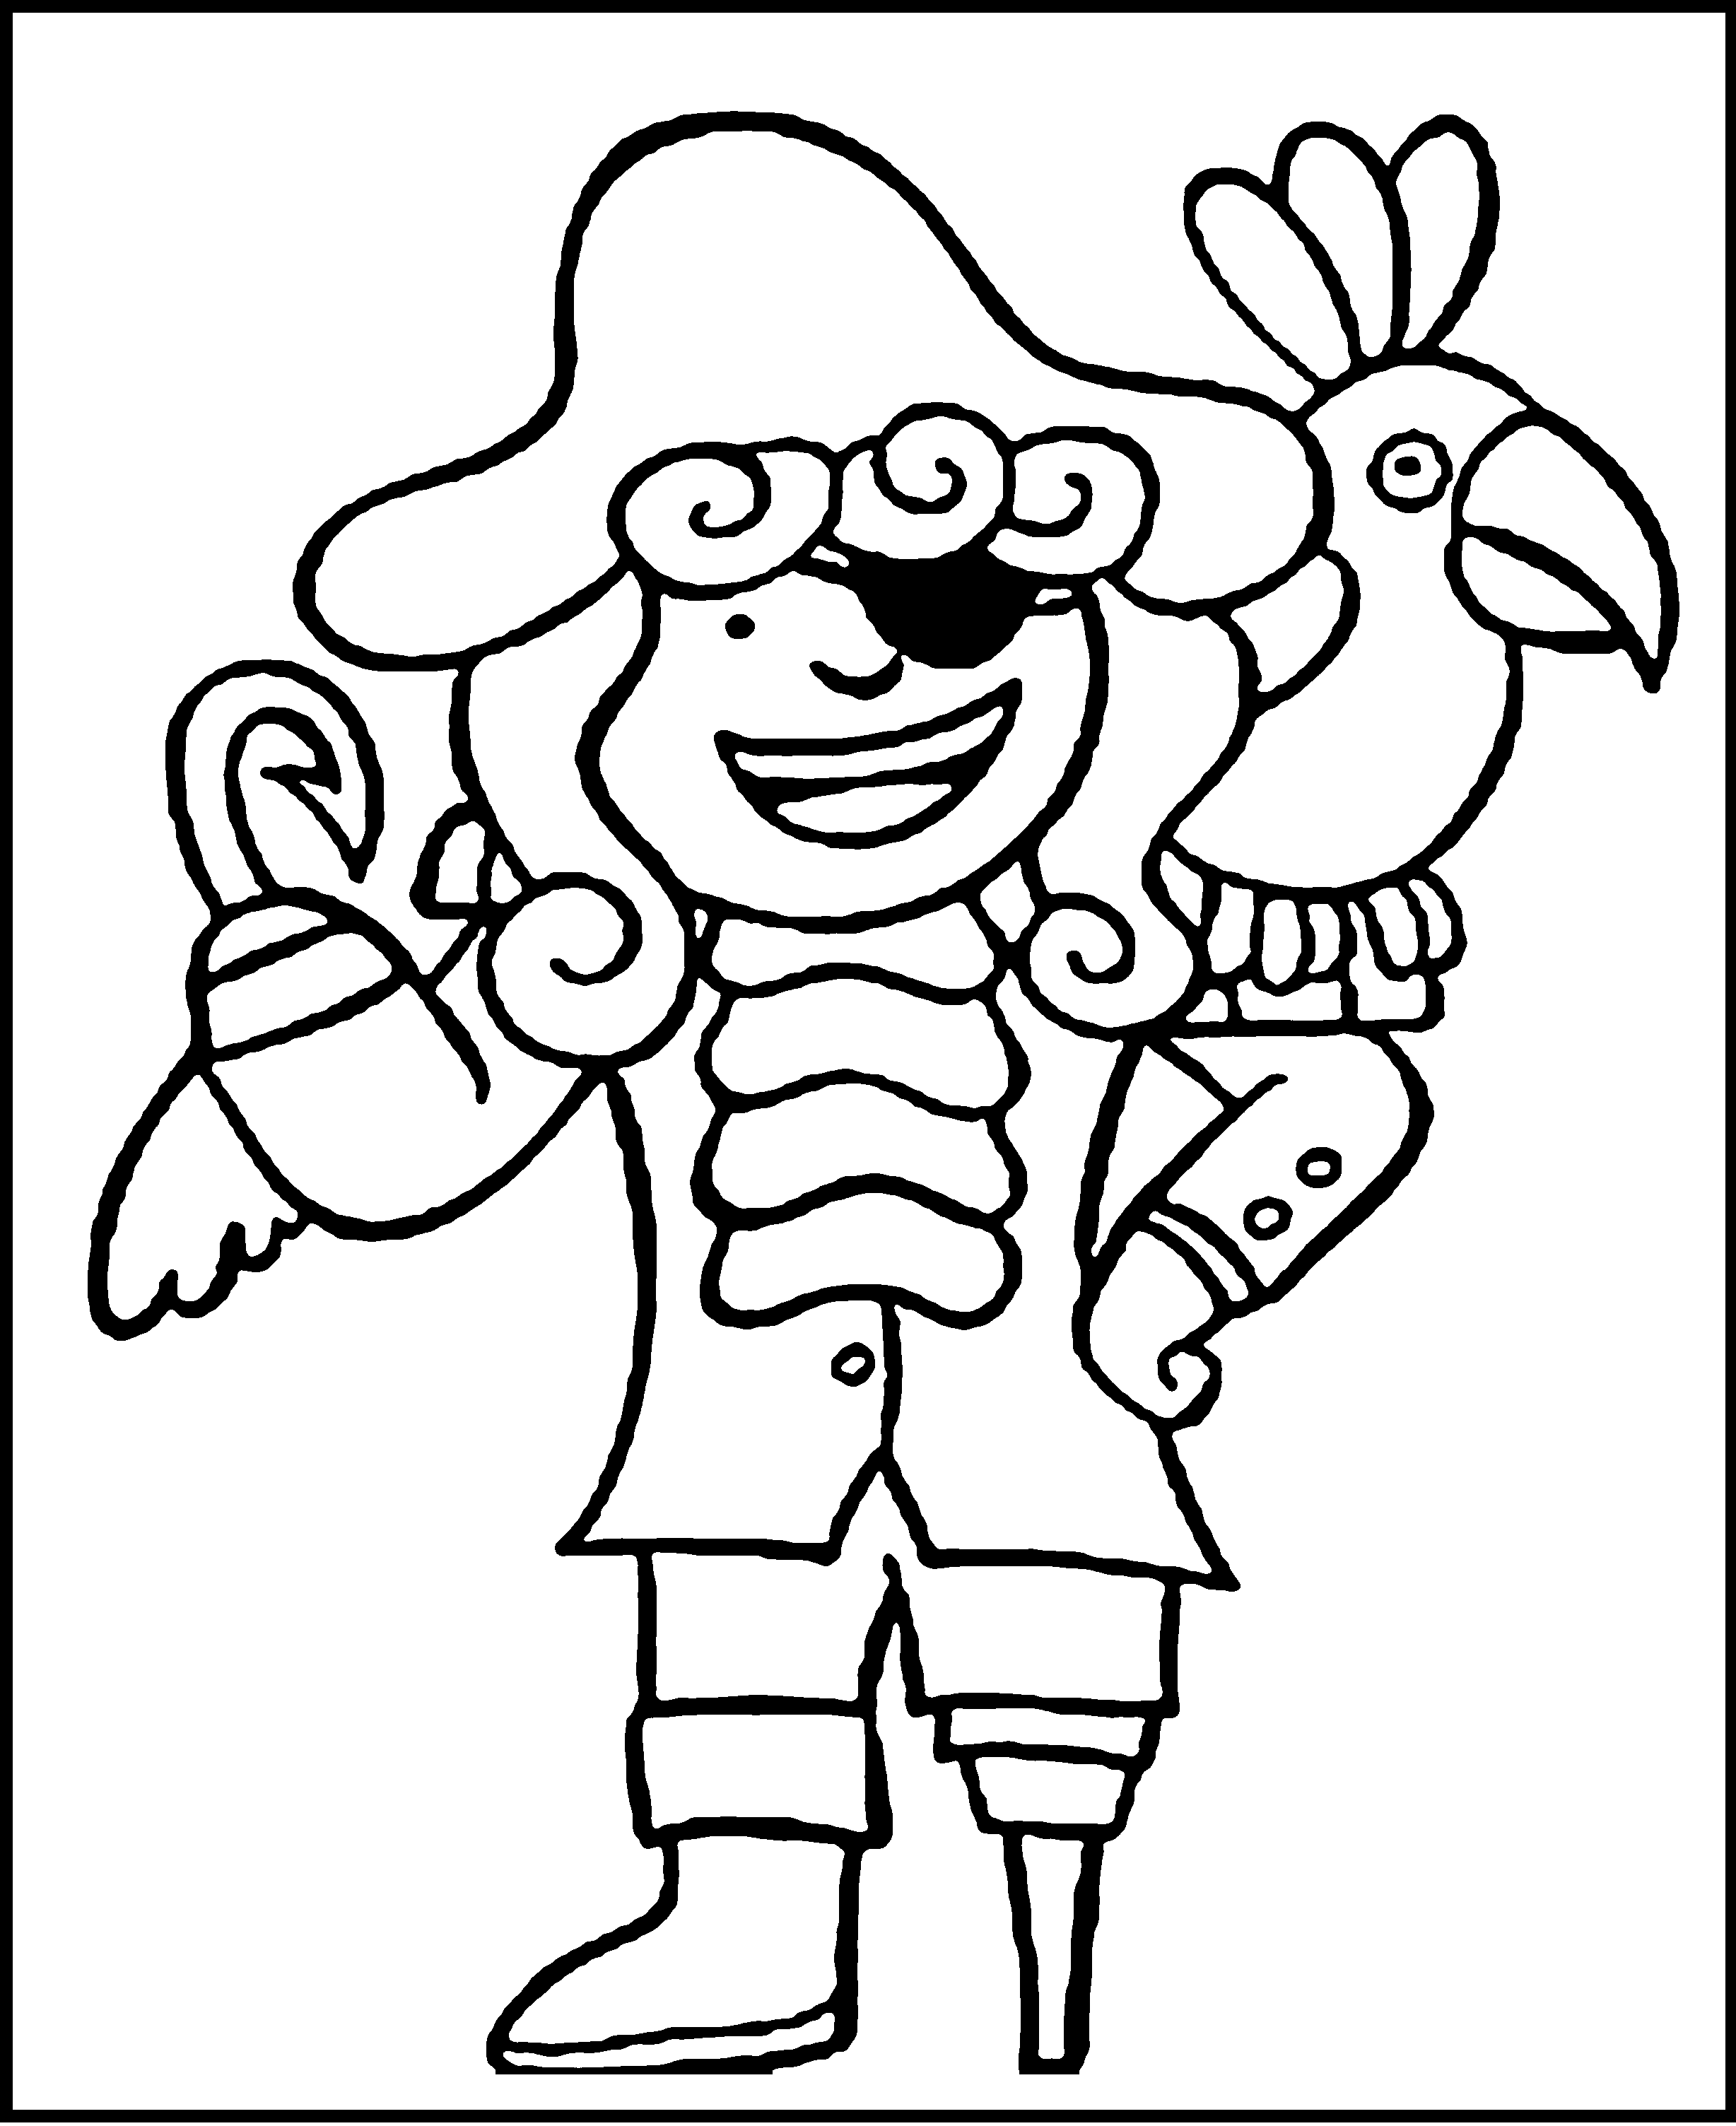 Printable Pirate Coloring Pages | Free Coloring Pages